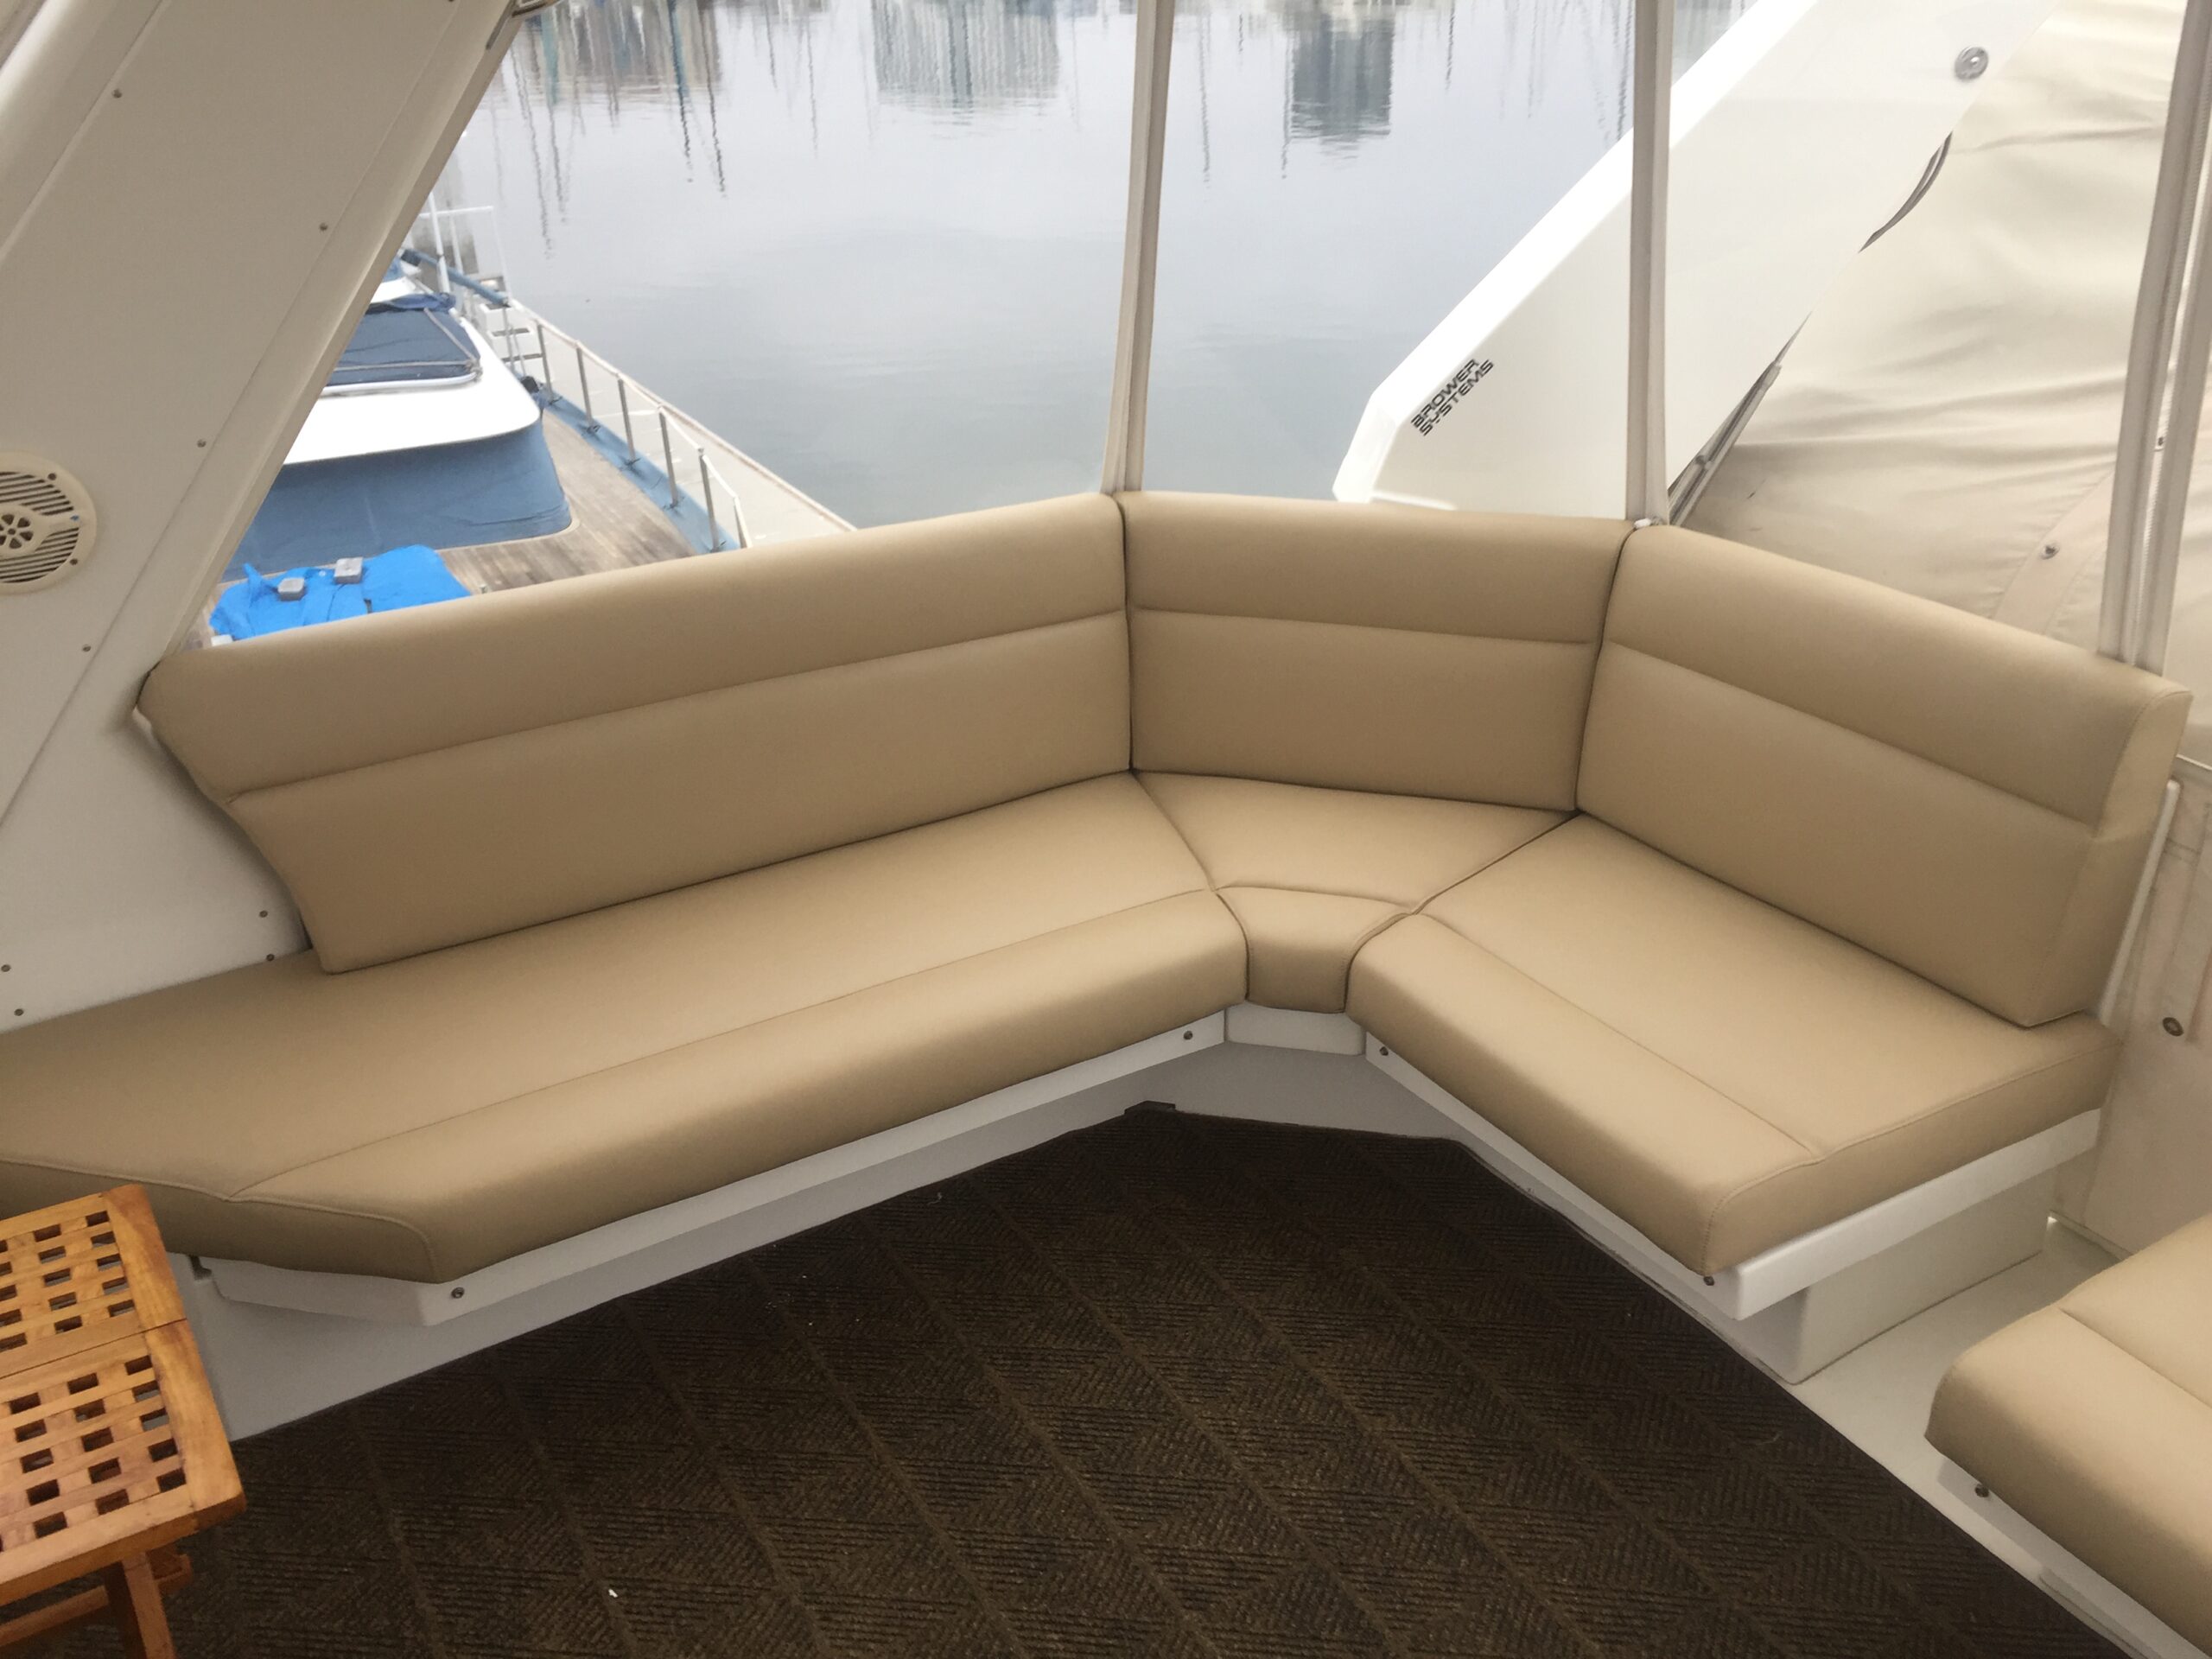 Interior Boat Cushions - Custom Made To Fit Your Application